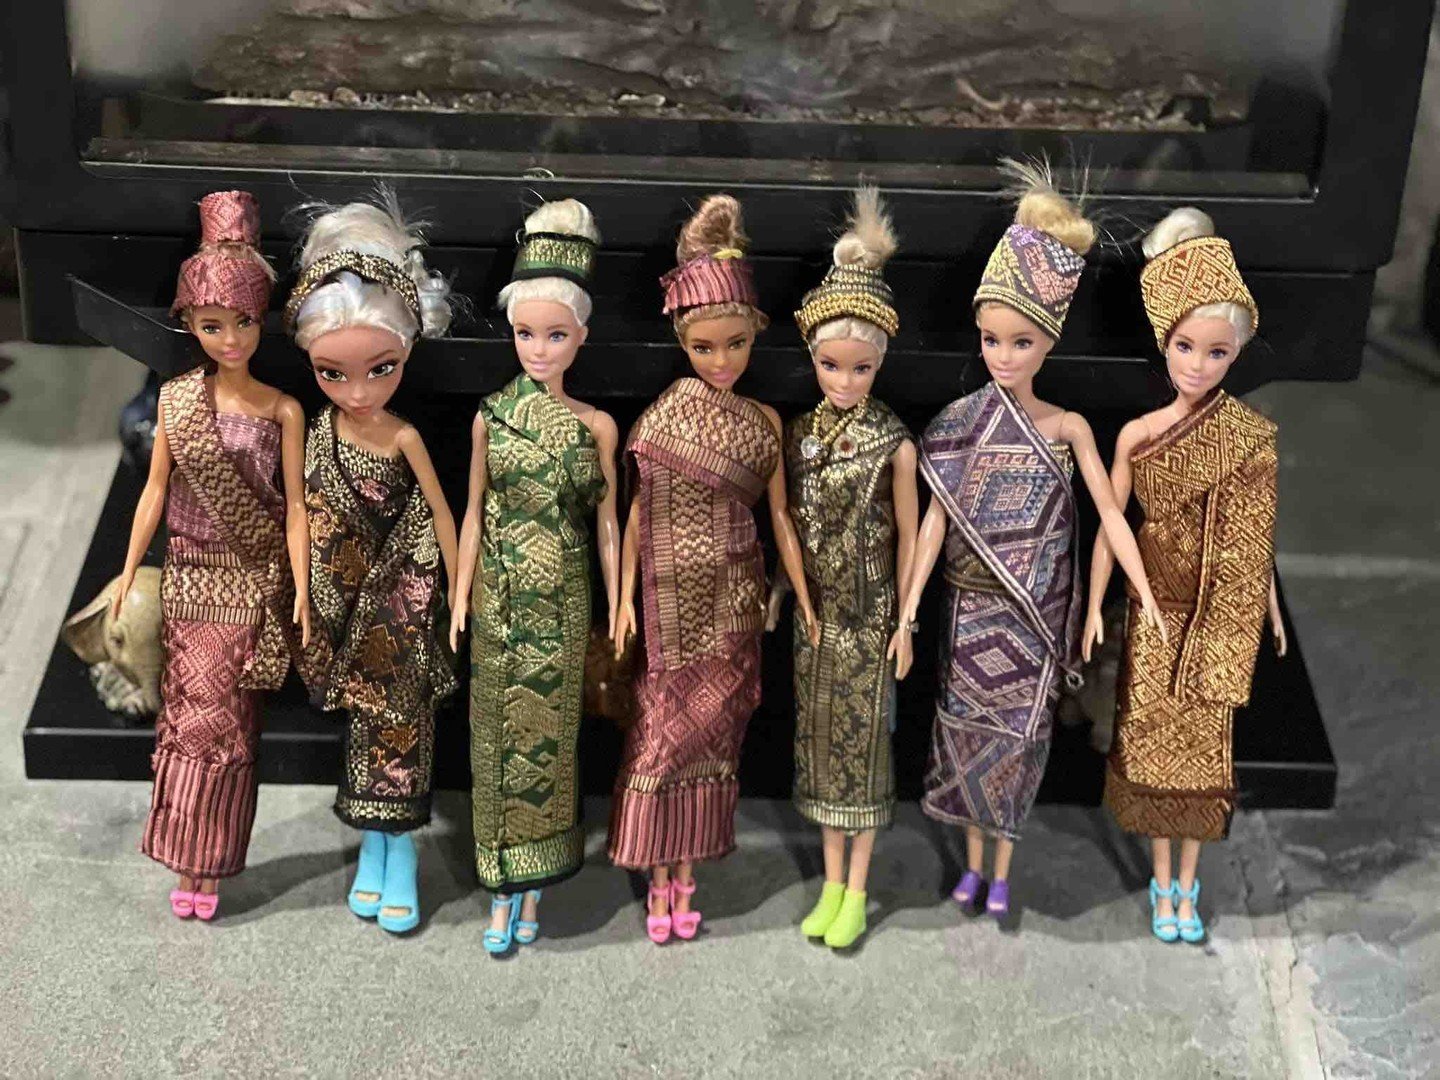 A grandma from Erie, PA created Lao traditional silk costumes for each of her granddaughters Barbie dolls. What a fun way to incorporate culture into everyday play. Hmmm, could there be there a small online business opportunity happening in the futur